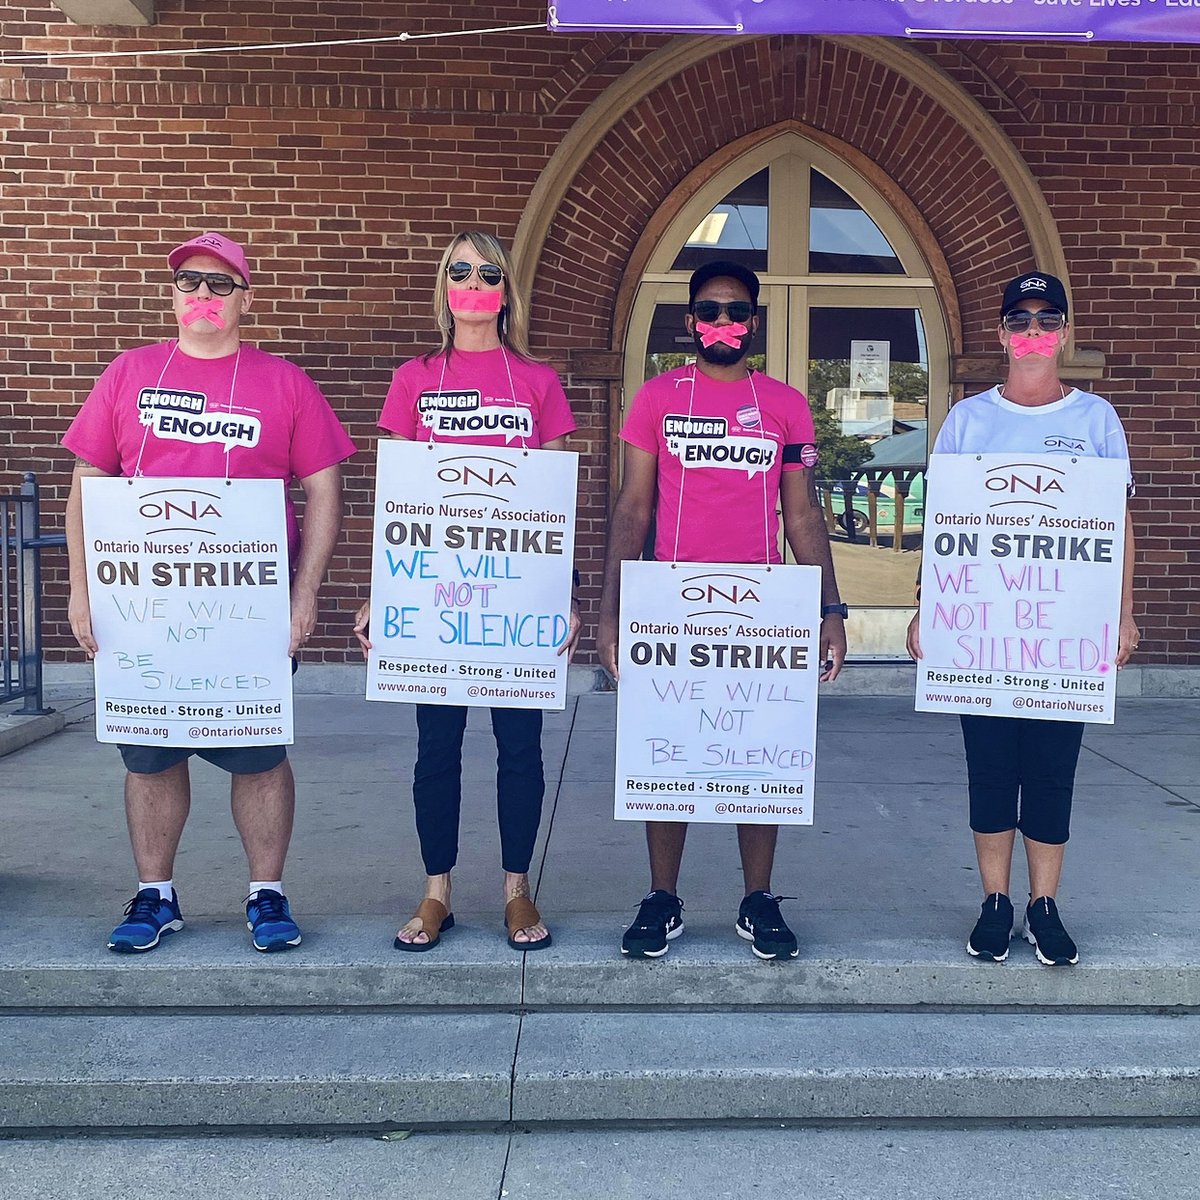 .@BellevilleON just denied a request from local nurses & residents to speak at today's city council meeting, citing the wish to not interfere with “ongoing collective bargaining.” However, @HPEPublicHealth is not currently participating in collective bargaining! #supportnurses